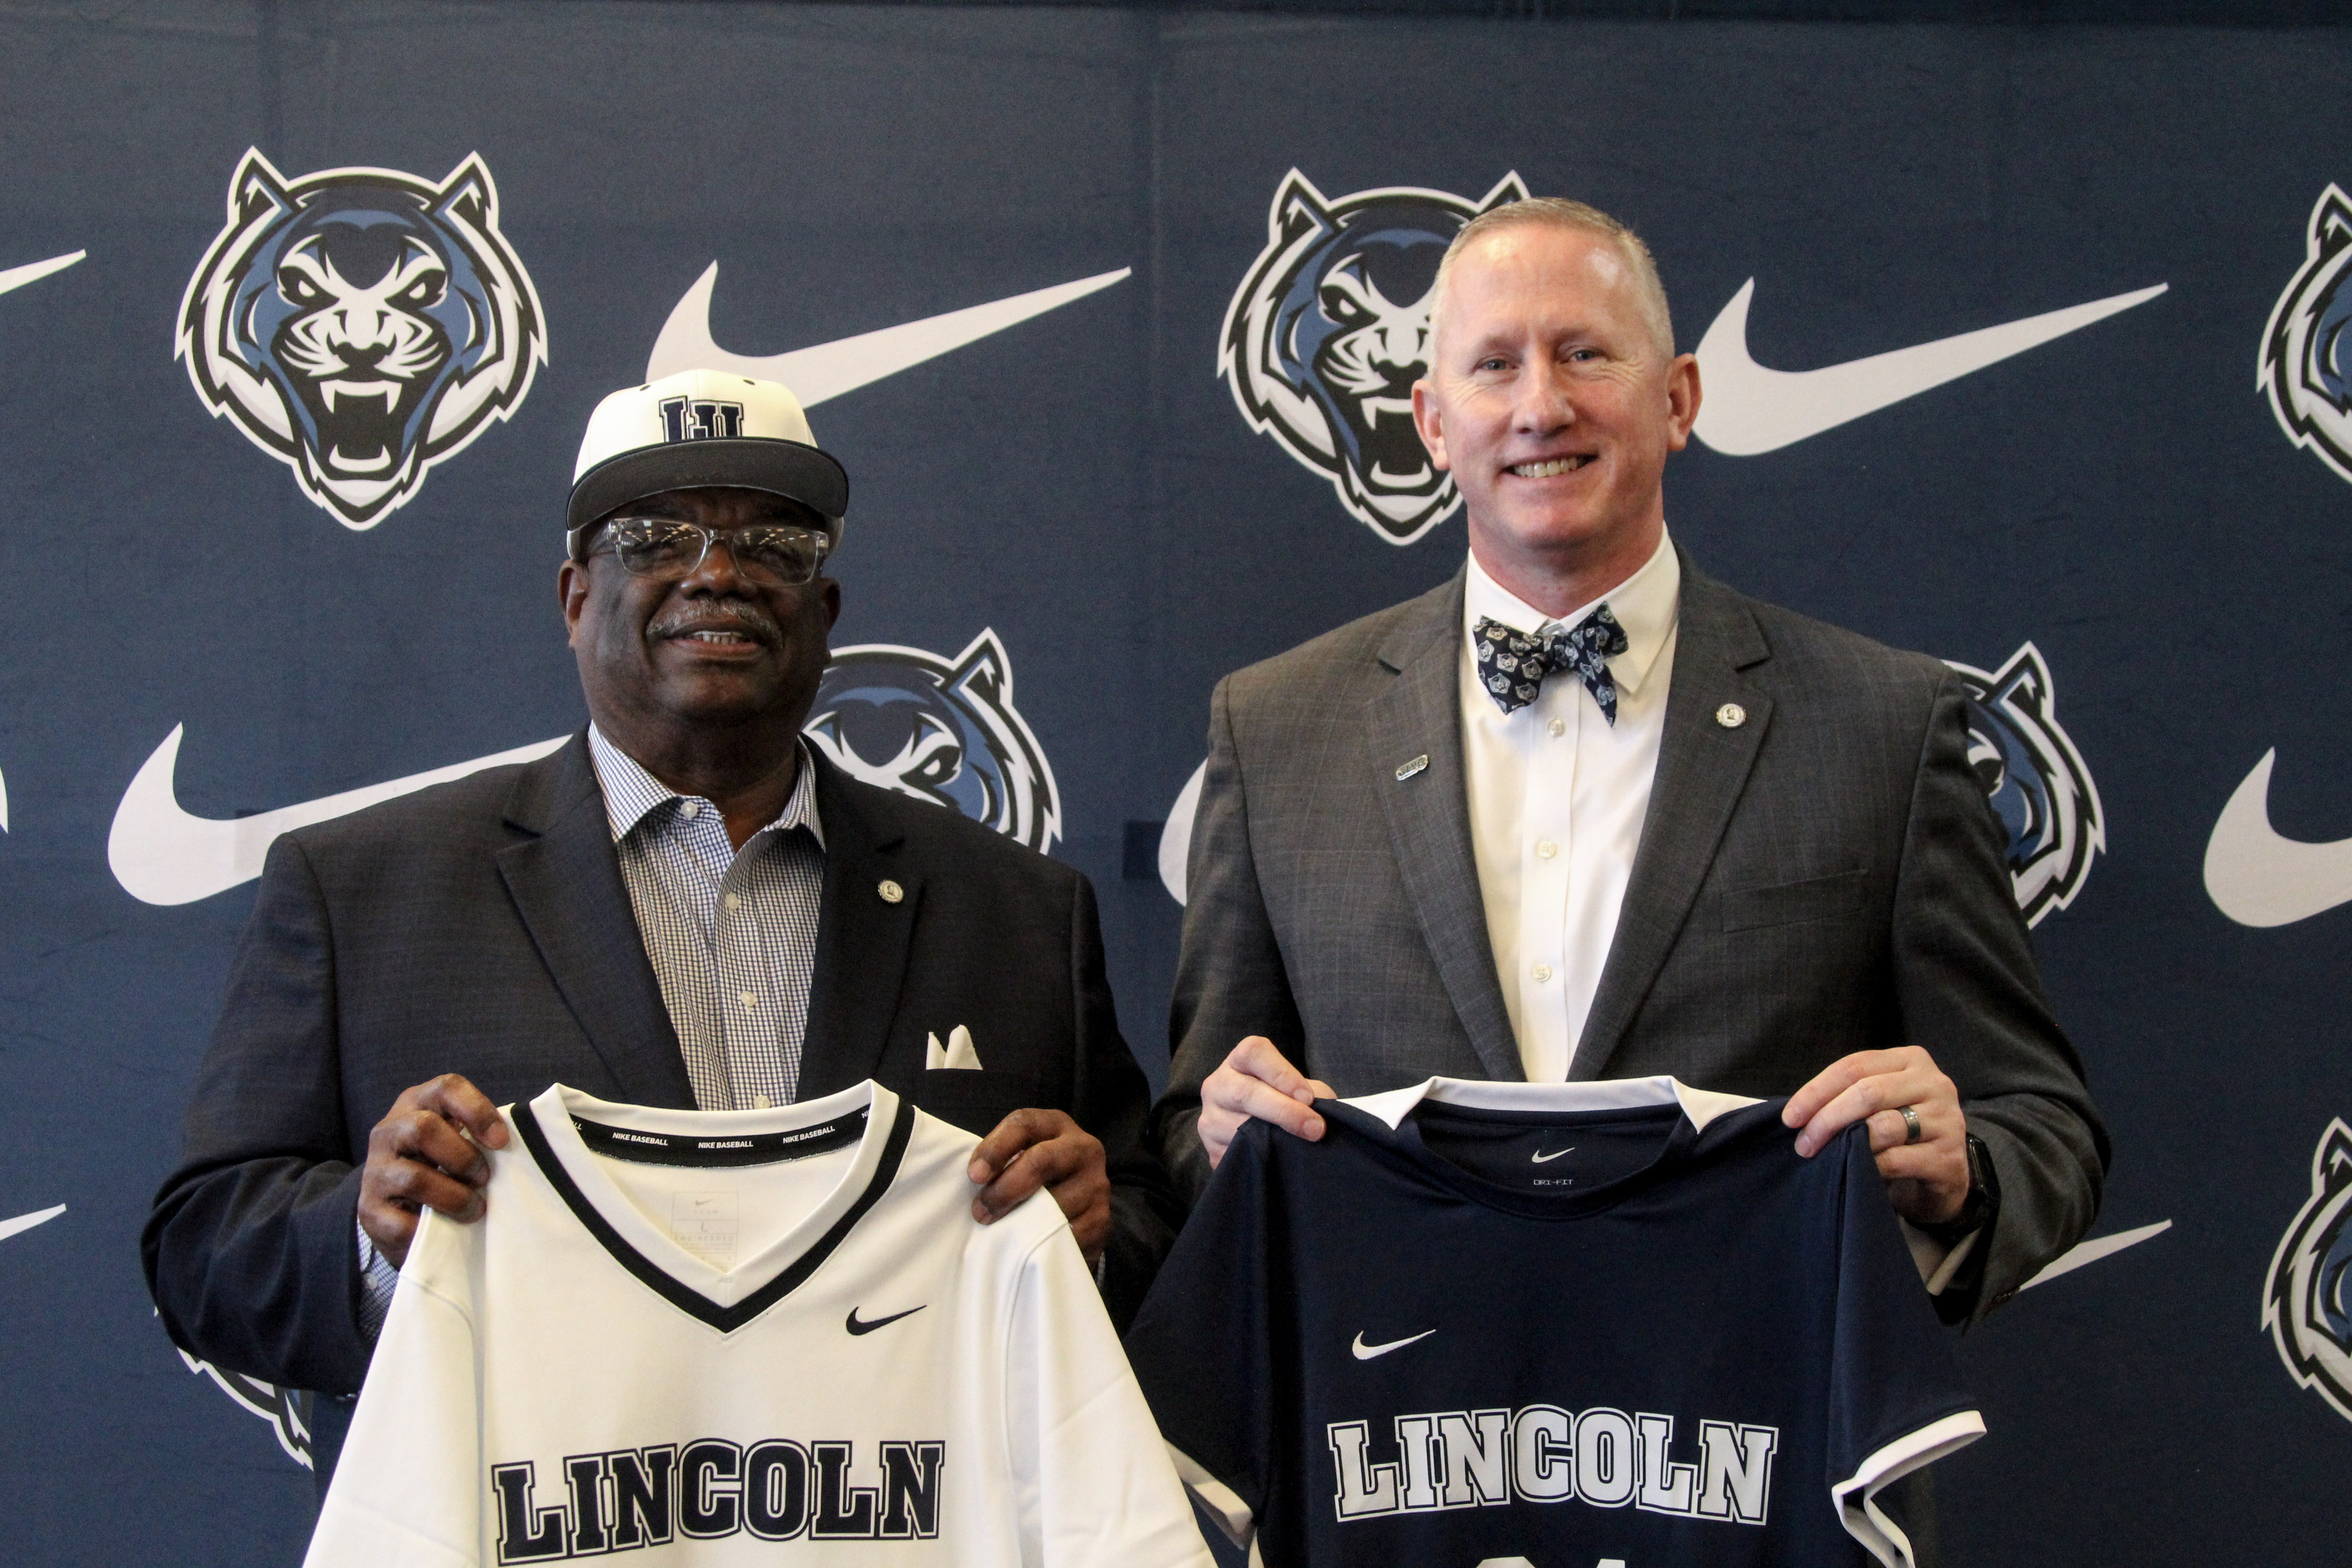   Above, LU Board of Curators President Victor Pasley and LU President Moseley display new LU Blue Tigers athletic jerseys.